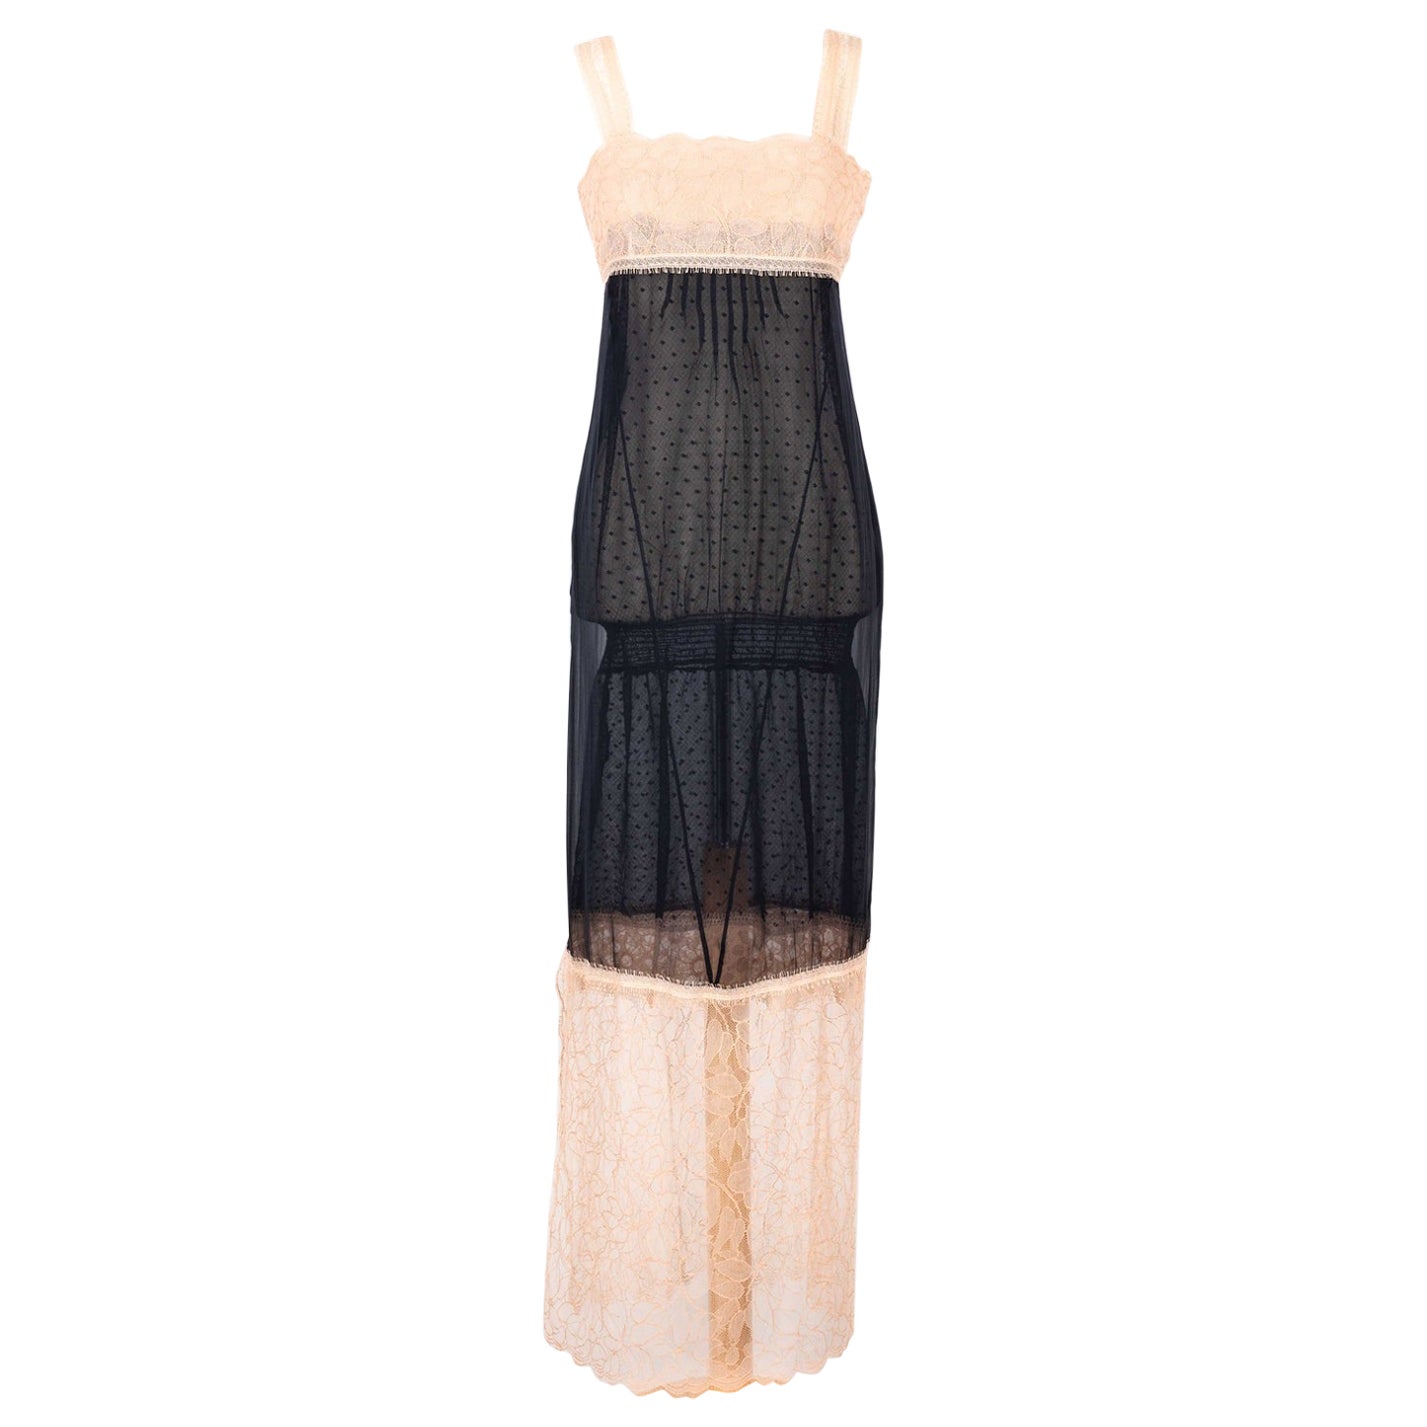 Chanel Babydoll-Style Dress in Black Silk Muslin and Beige Lace, 1990s For Sale